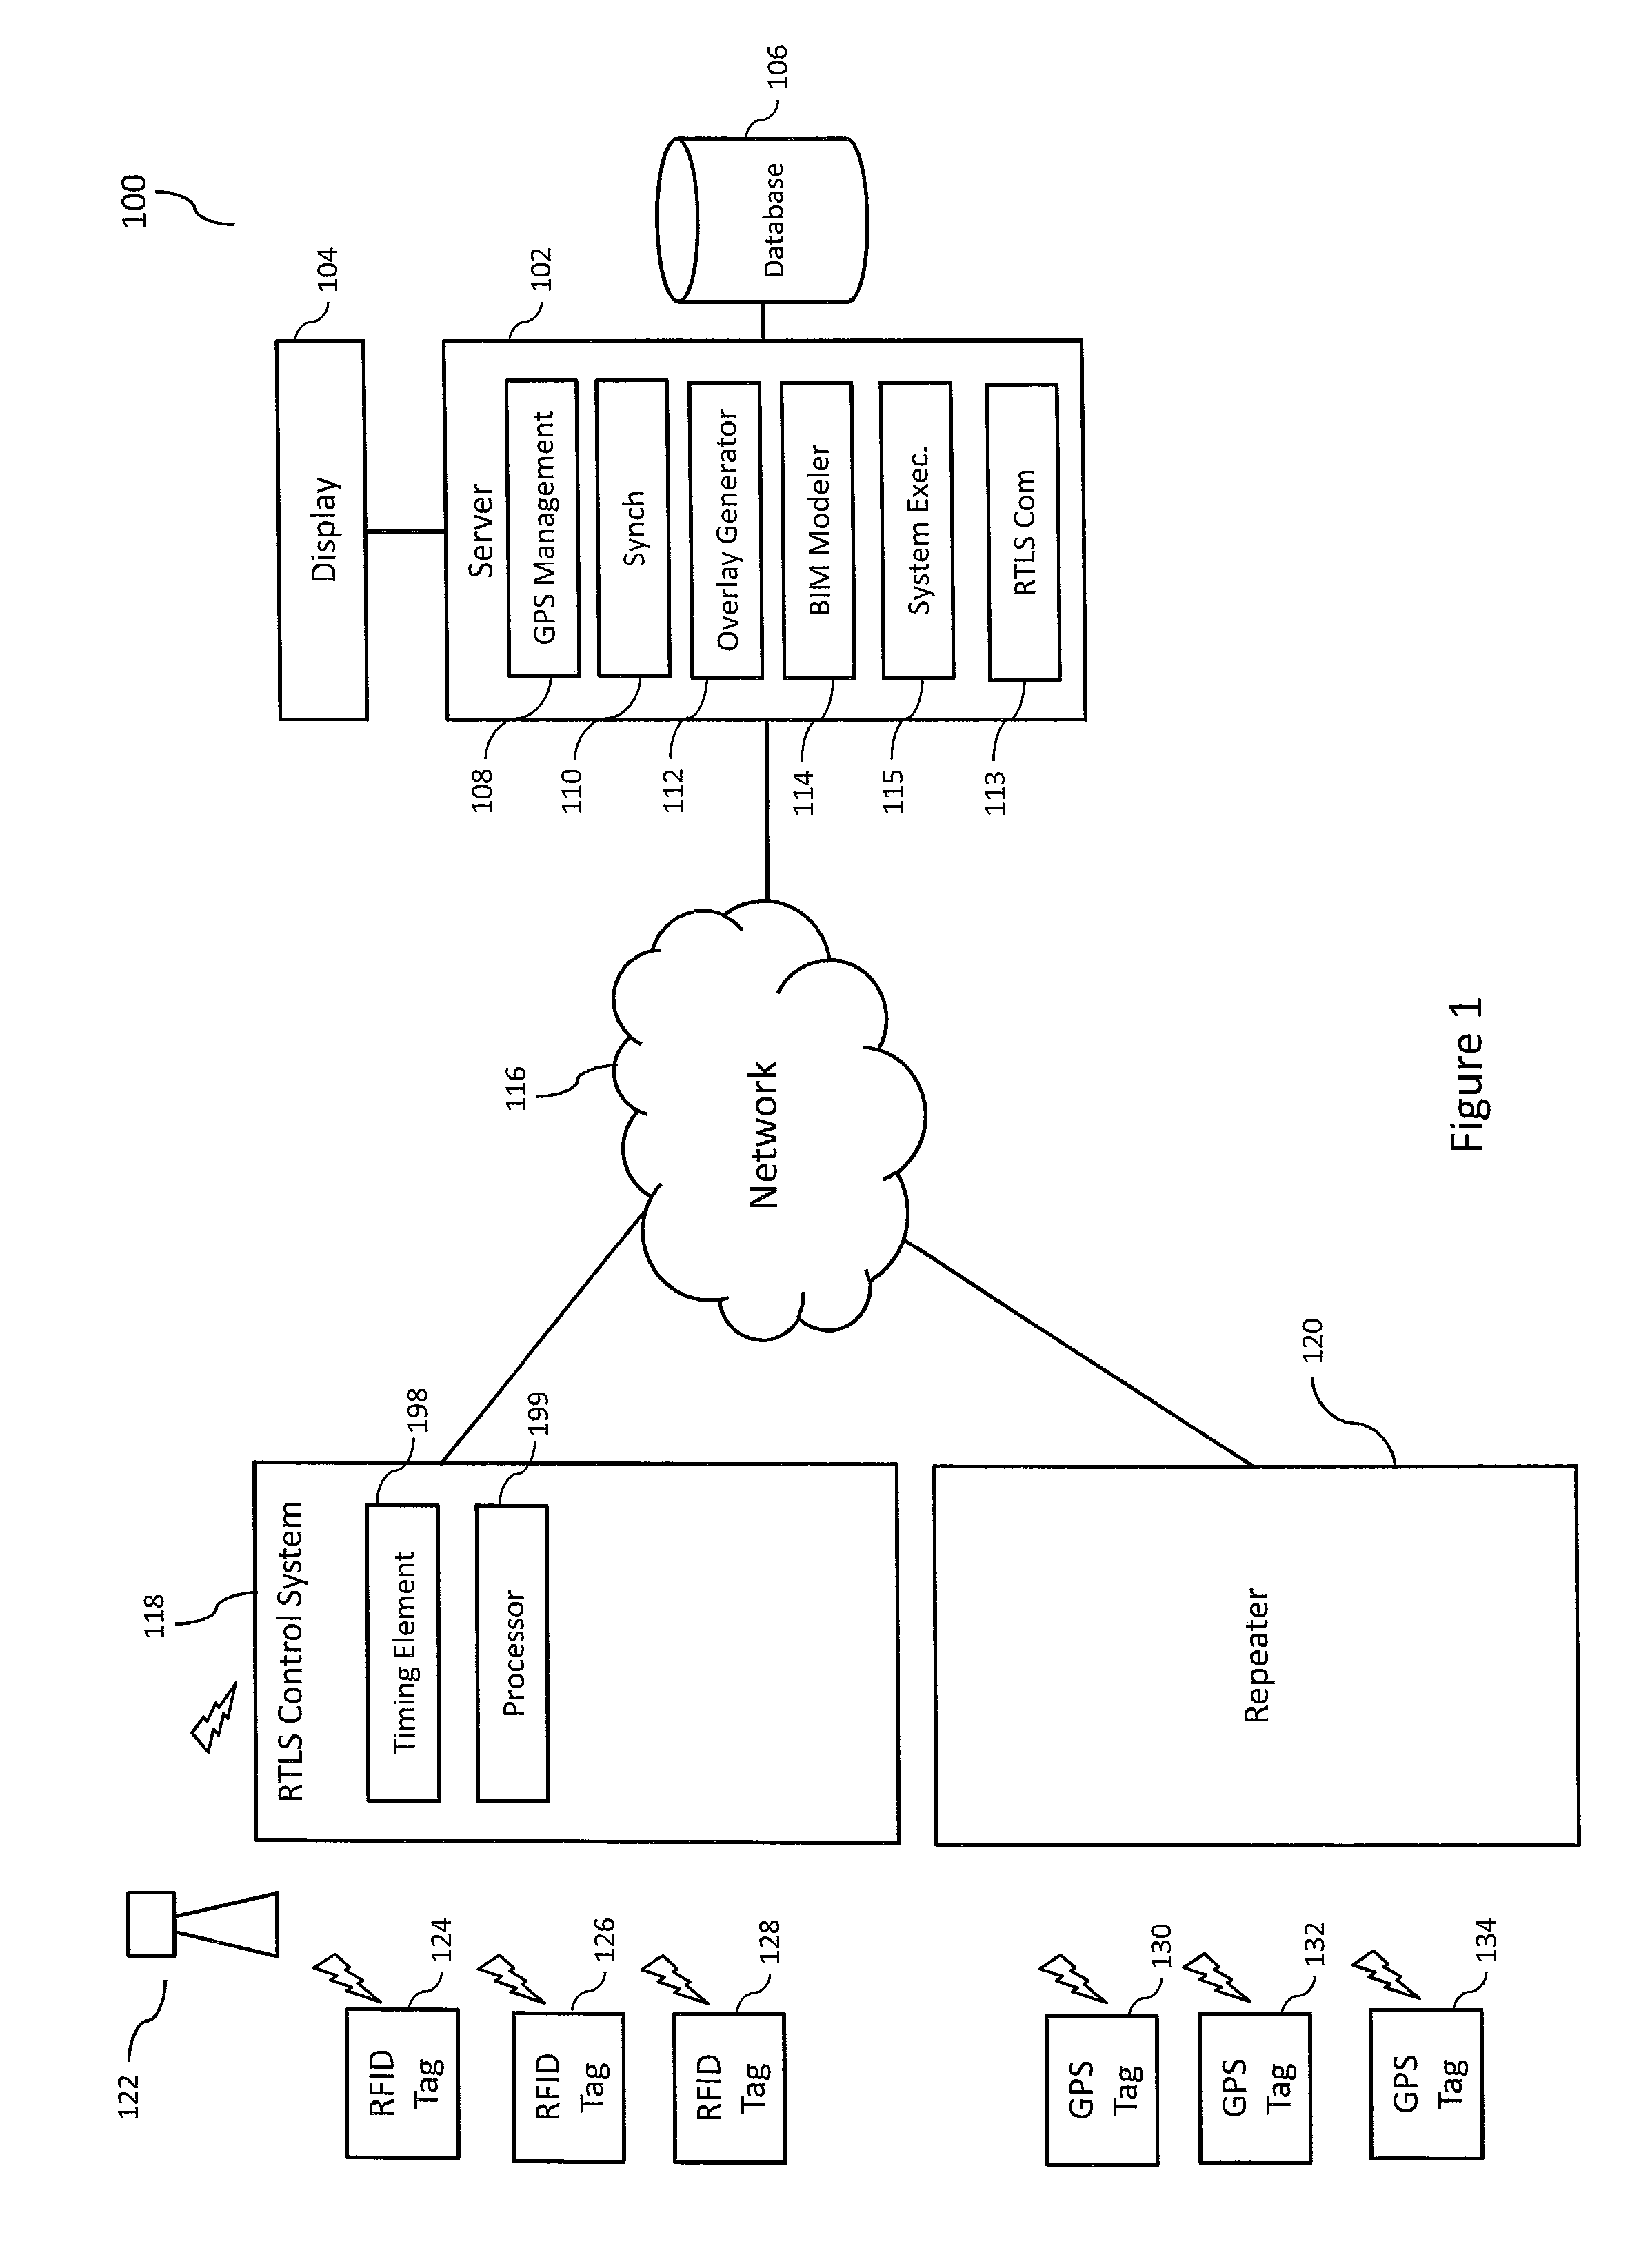 Method and apparatus for multi-mode tracking and display of personnel locations in a graphical model